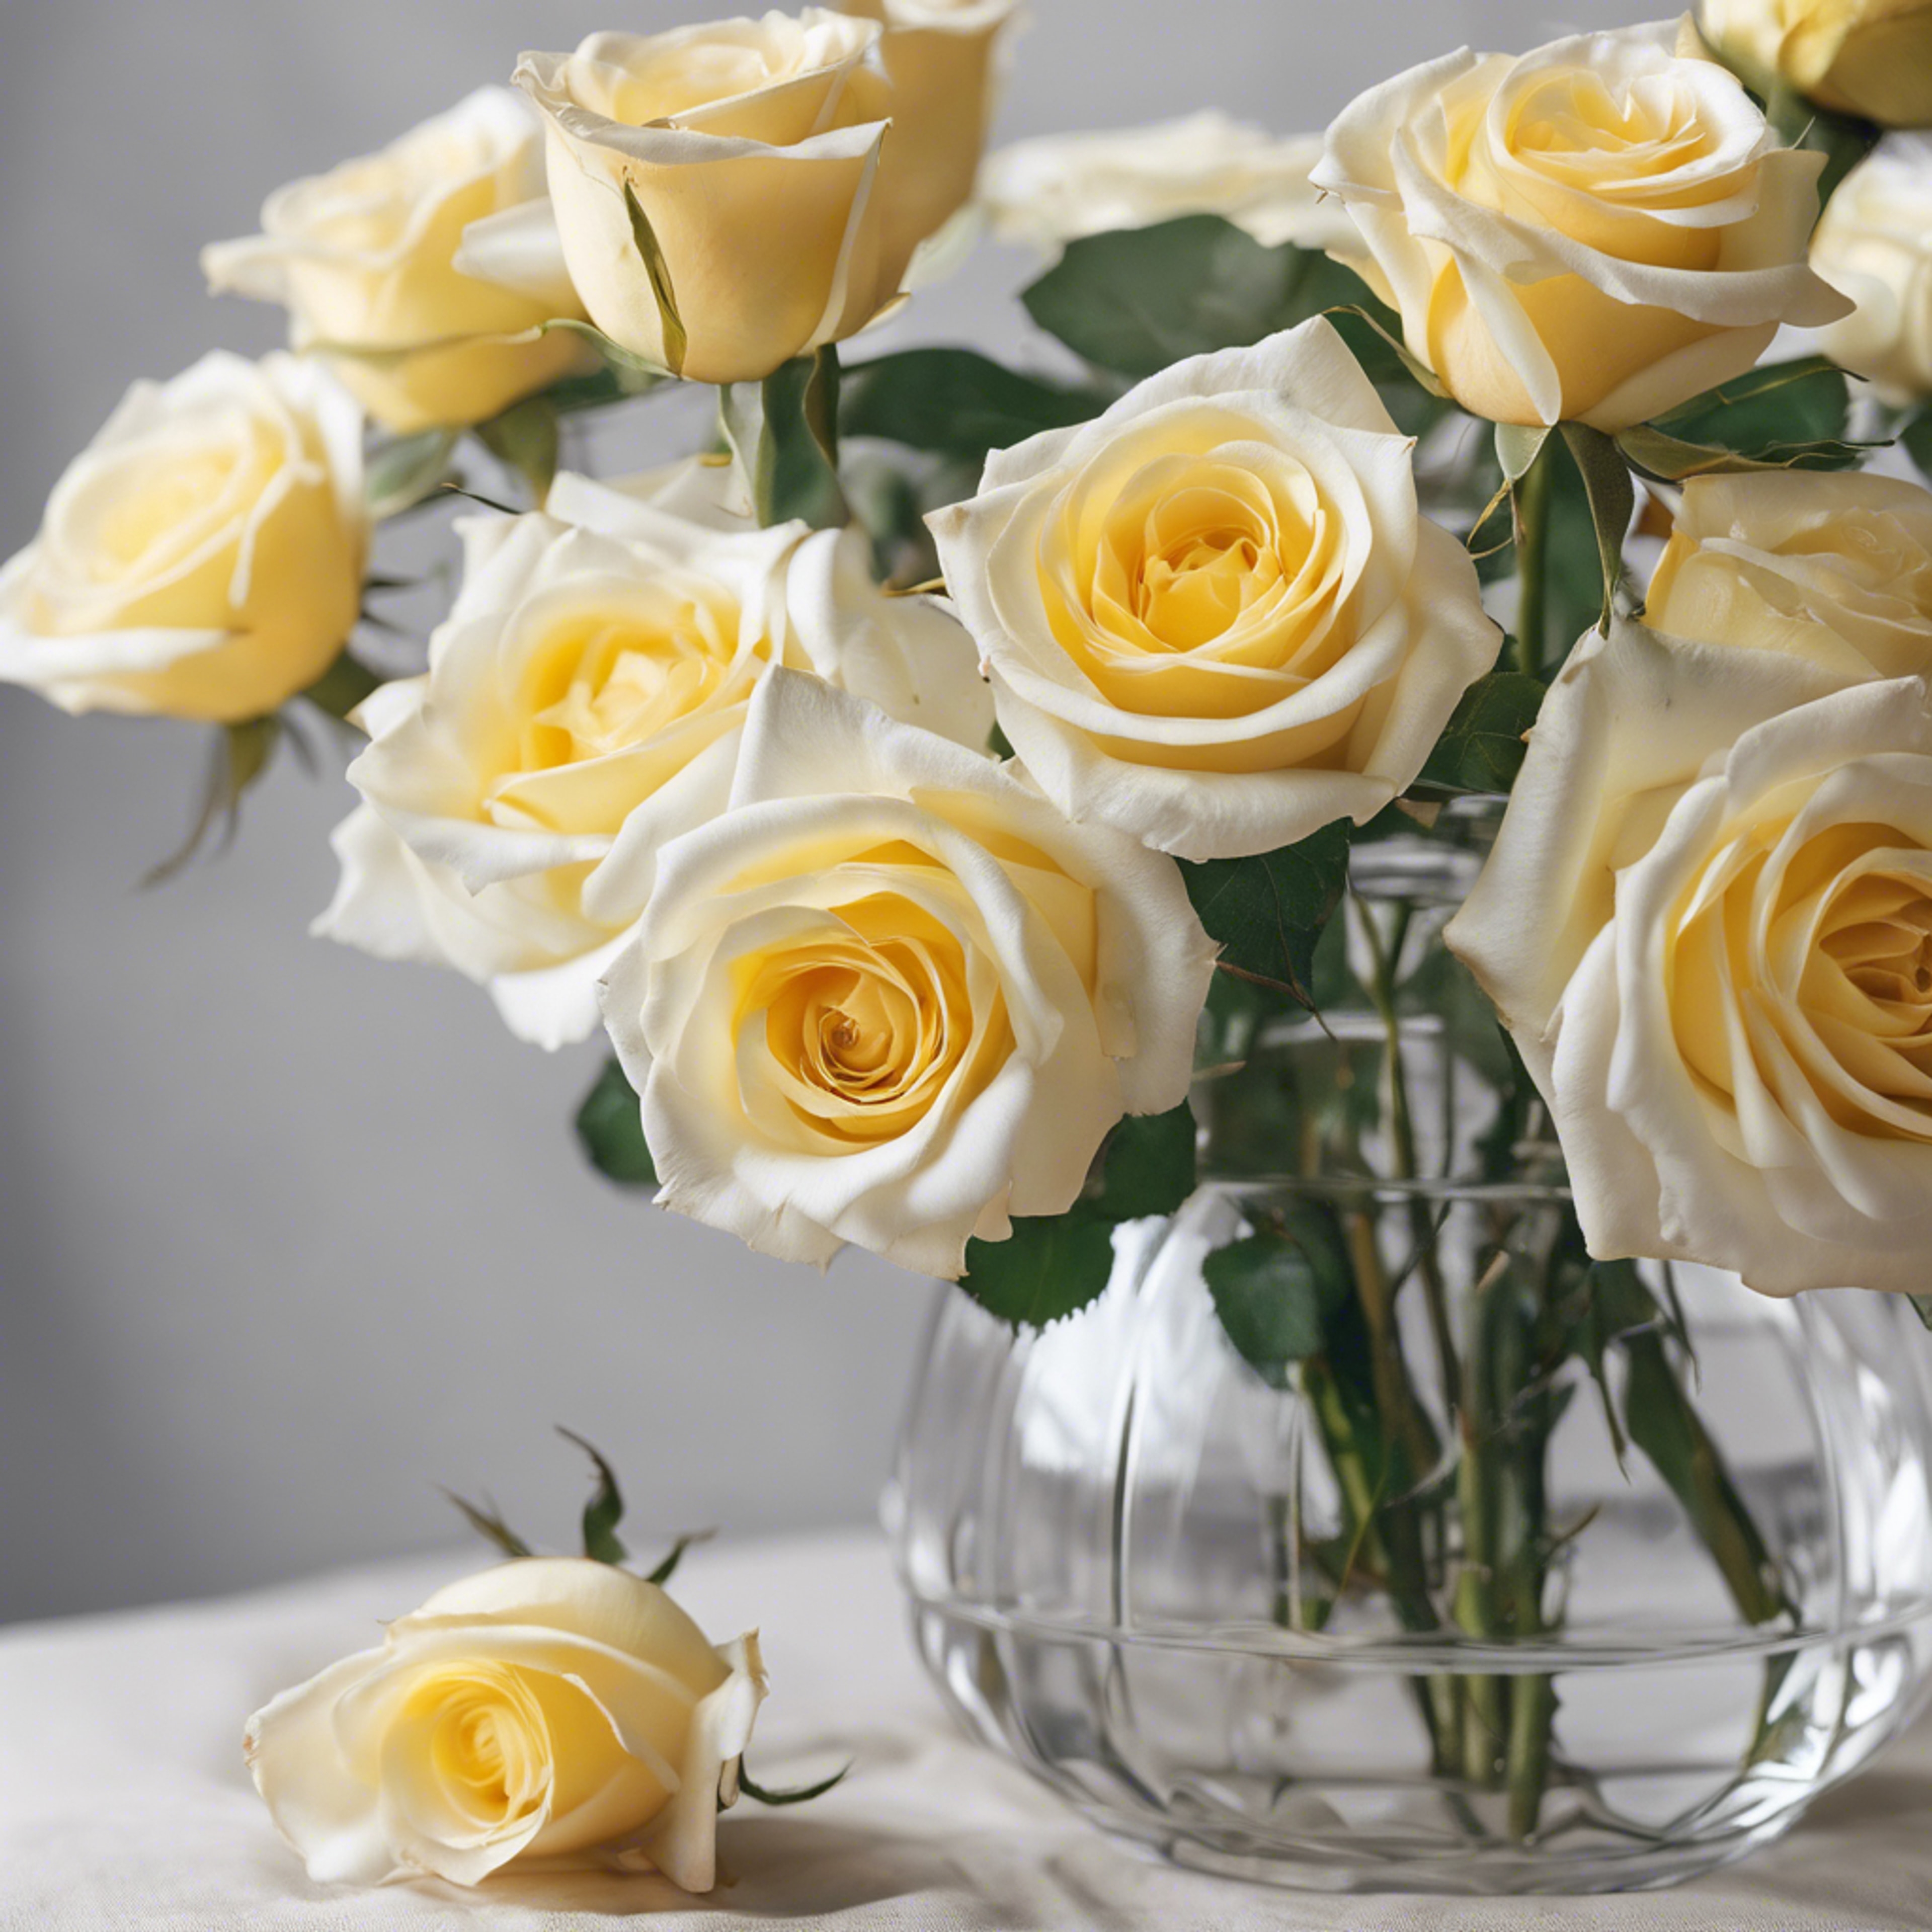 A beautiful array of luminescent white and yellow roses in a crystal clear vase. טפט[29c0e485a0b1412795b9]